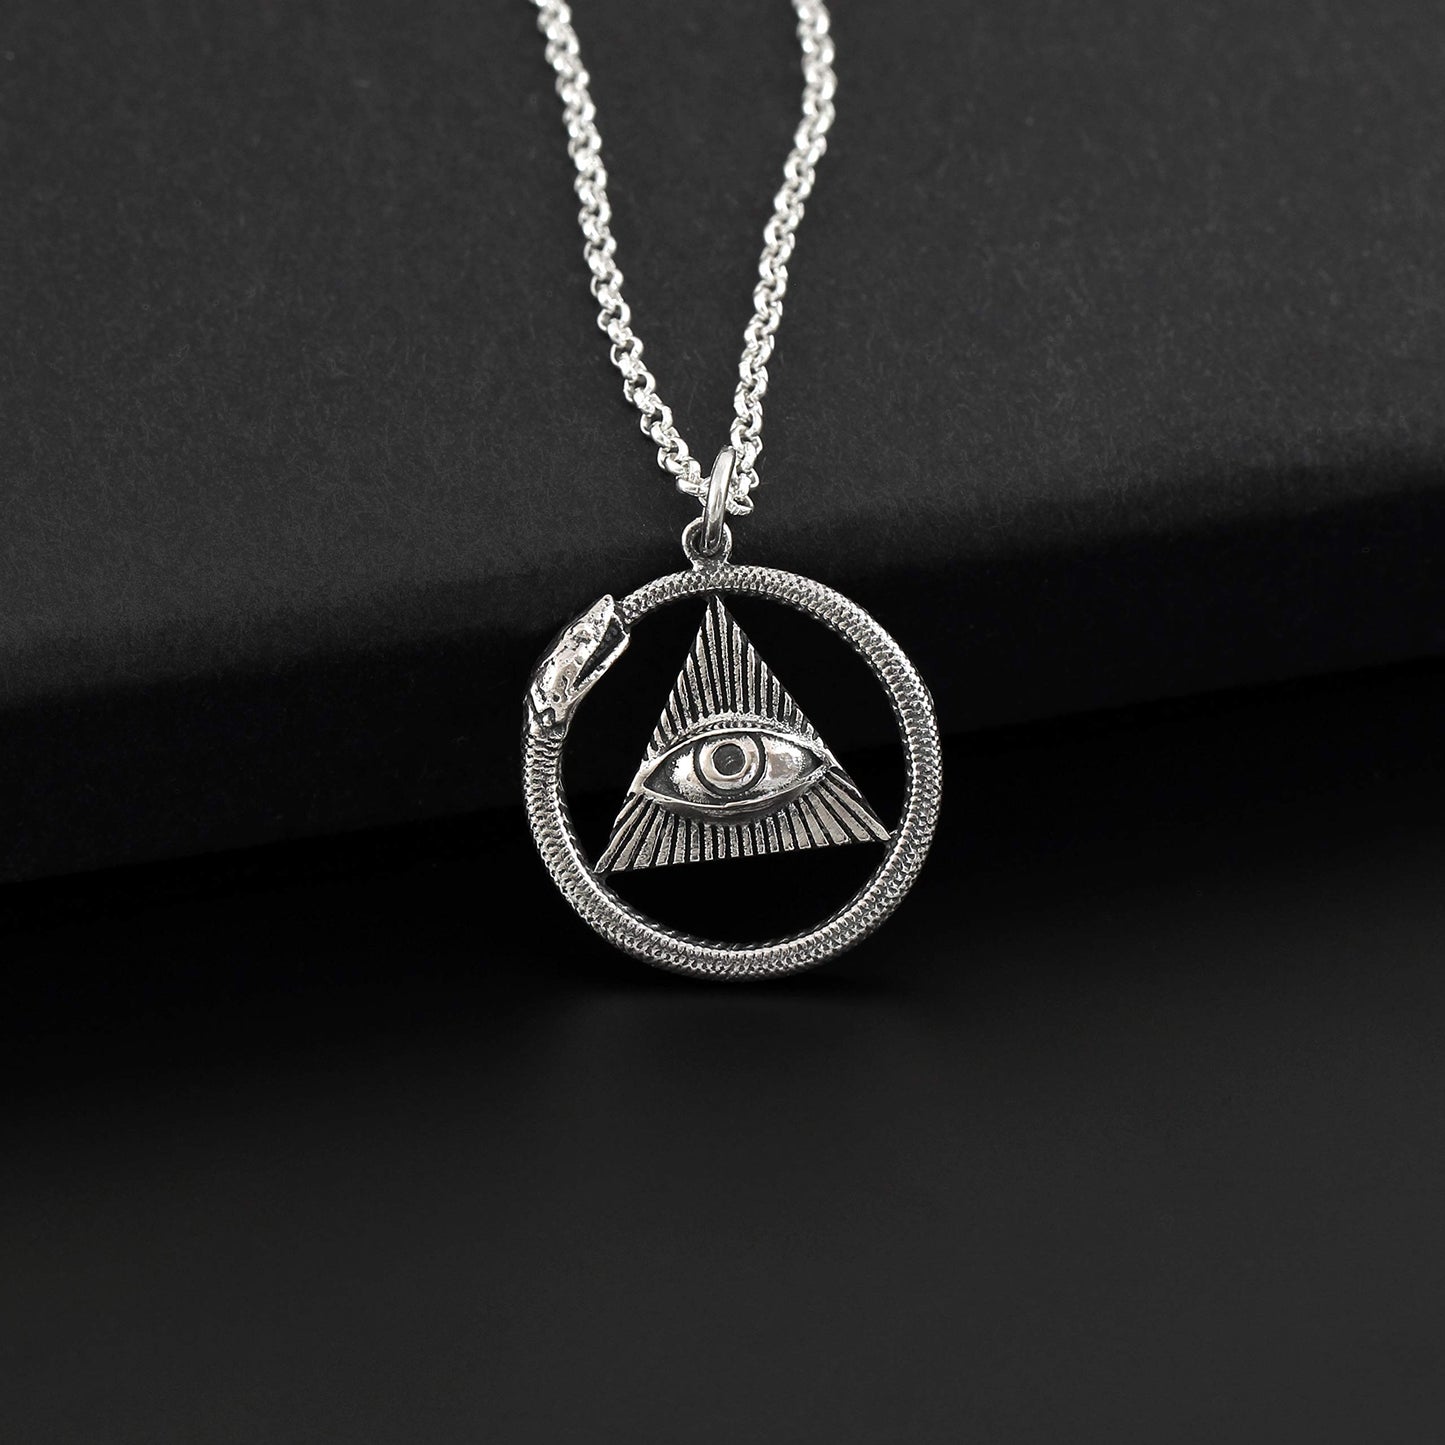 Antique Ouroboros All Seeing Eye Pendant Necklace • Bright Sterling Silver Chain • Sterling Silver Ouroboros Snake • Eye of God • Metaphysical Jewelry • Spiritual Gifts for Women • Healing Jewelry